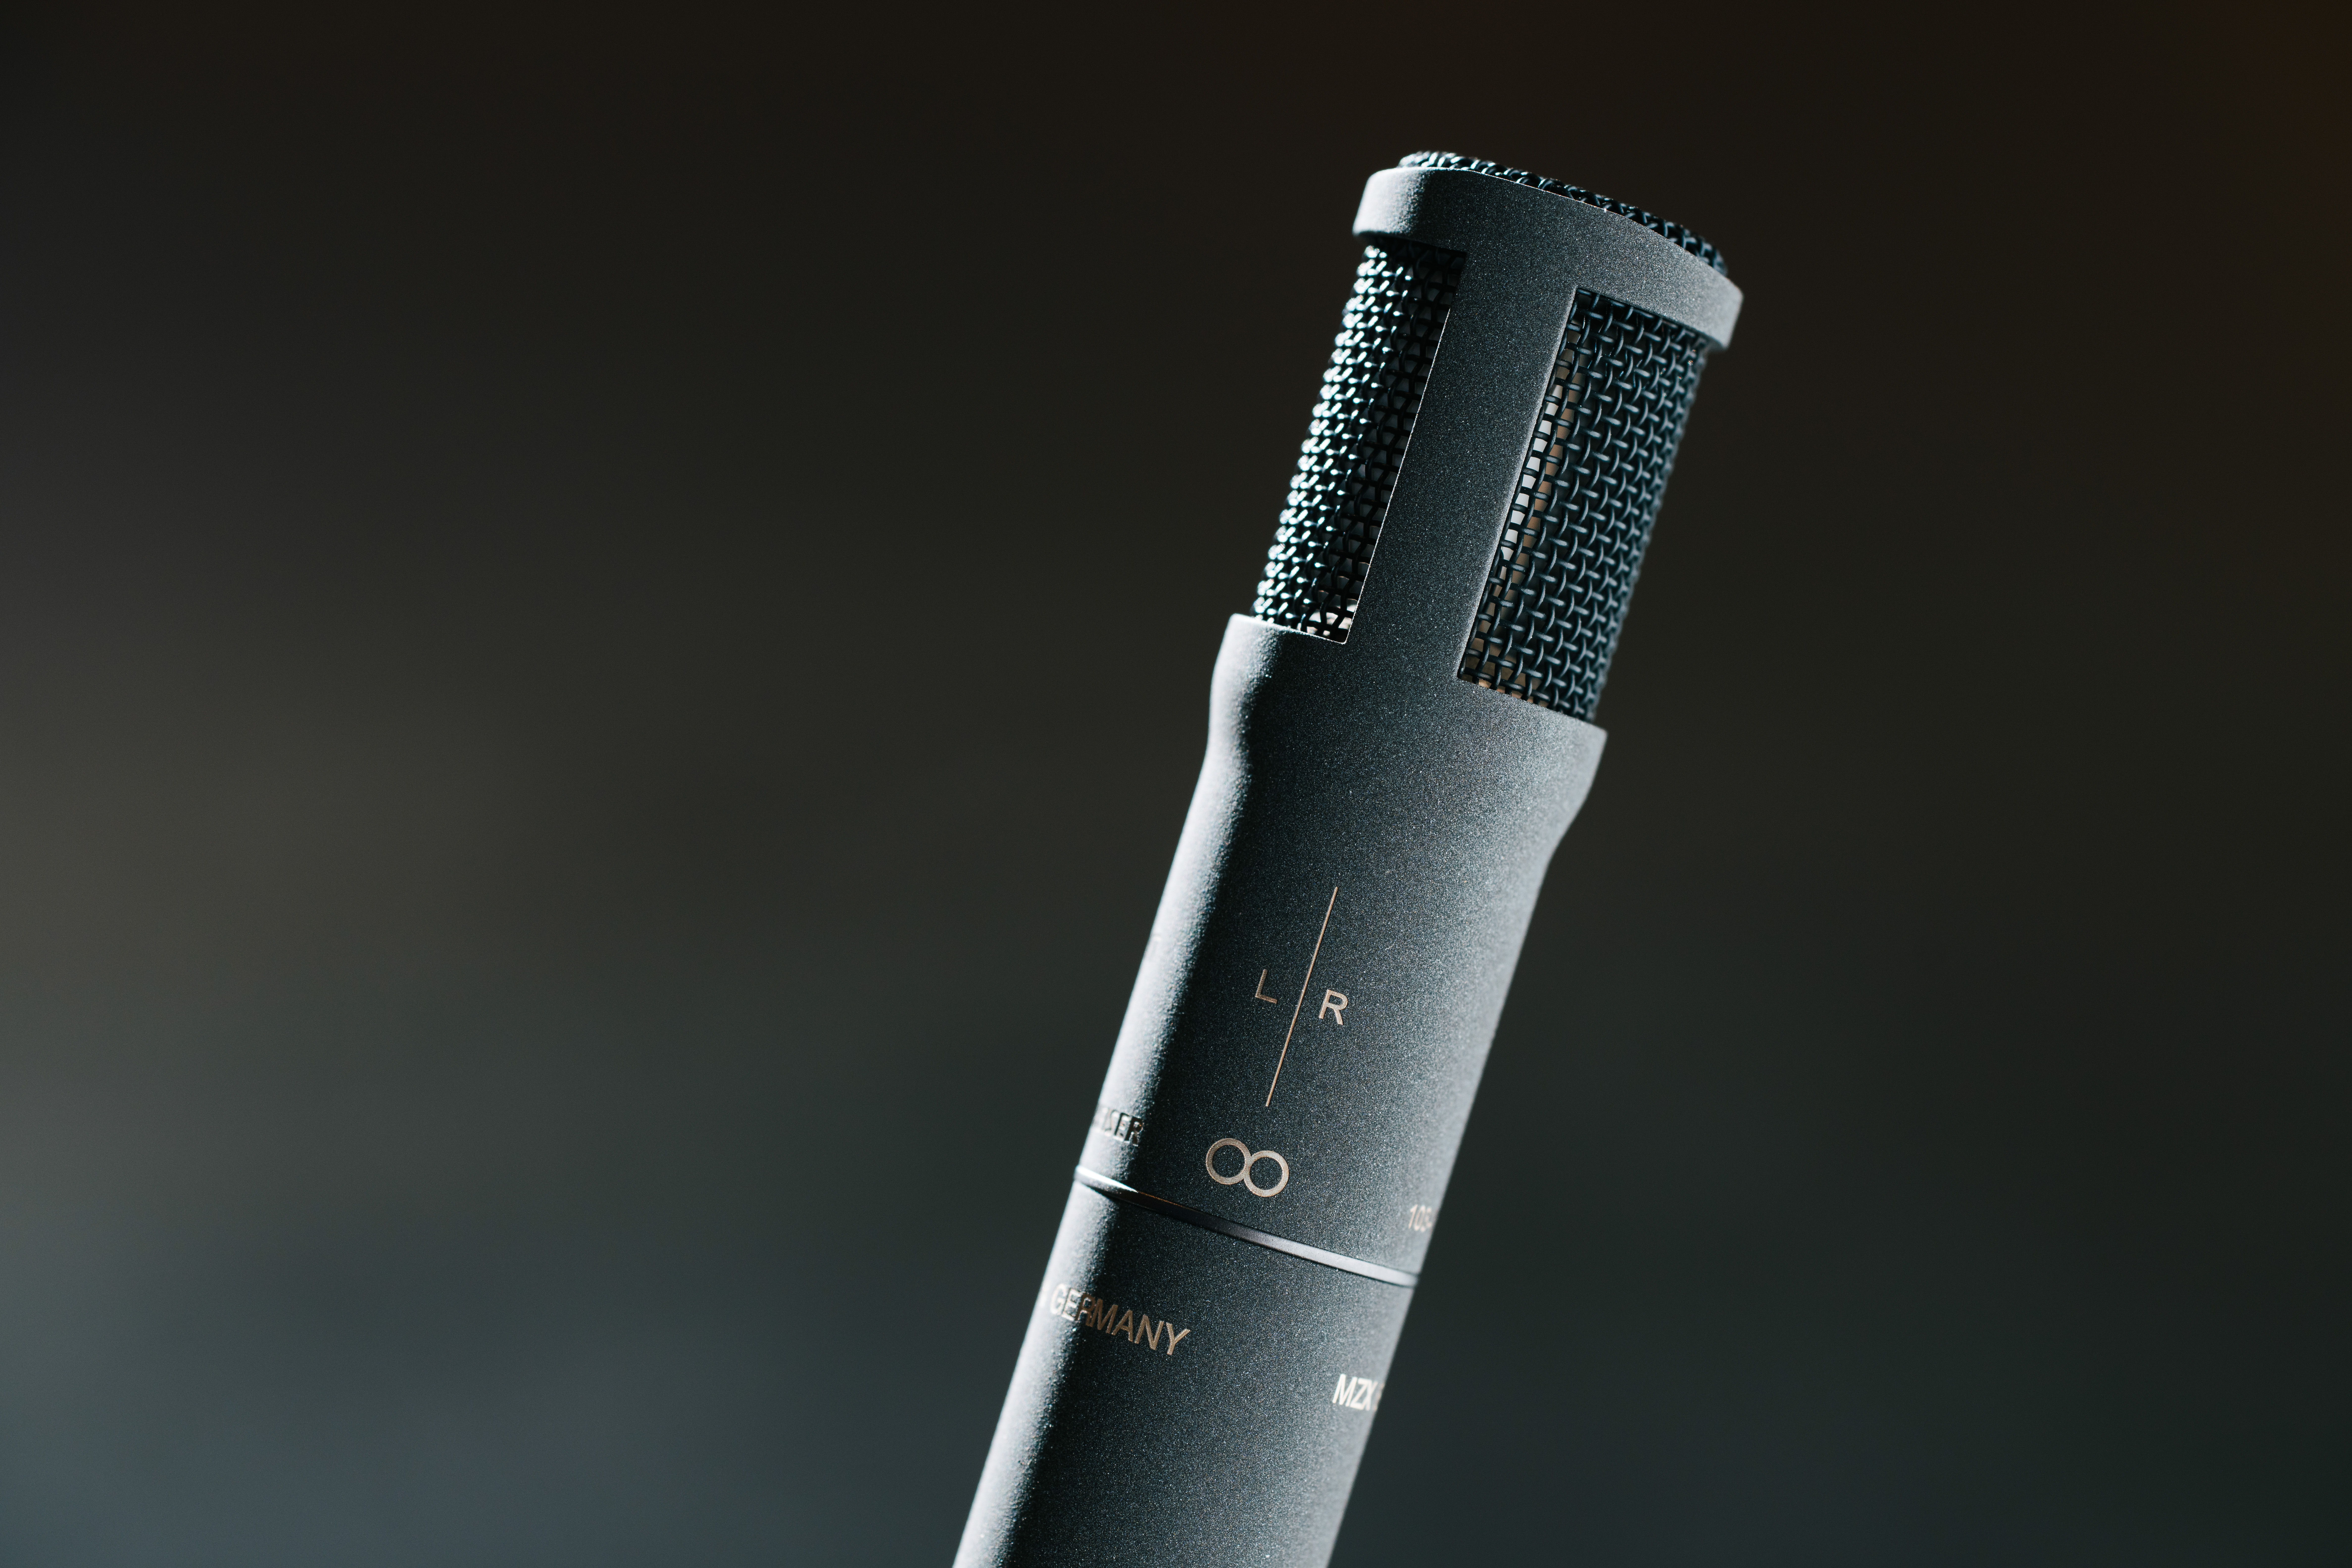 The MKH 8030 figure-of-eight RF condenser microphone is extremely compact, with a diameter of 19/21 mm and a length of 93 mm including the XLR module